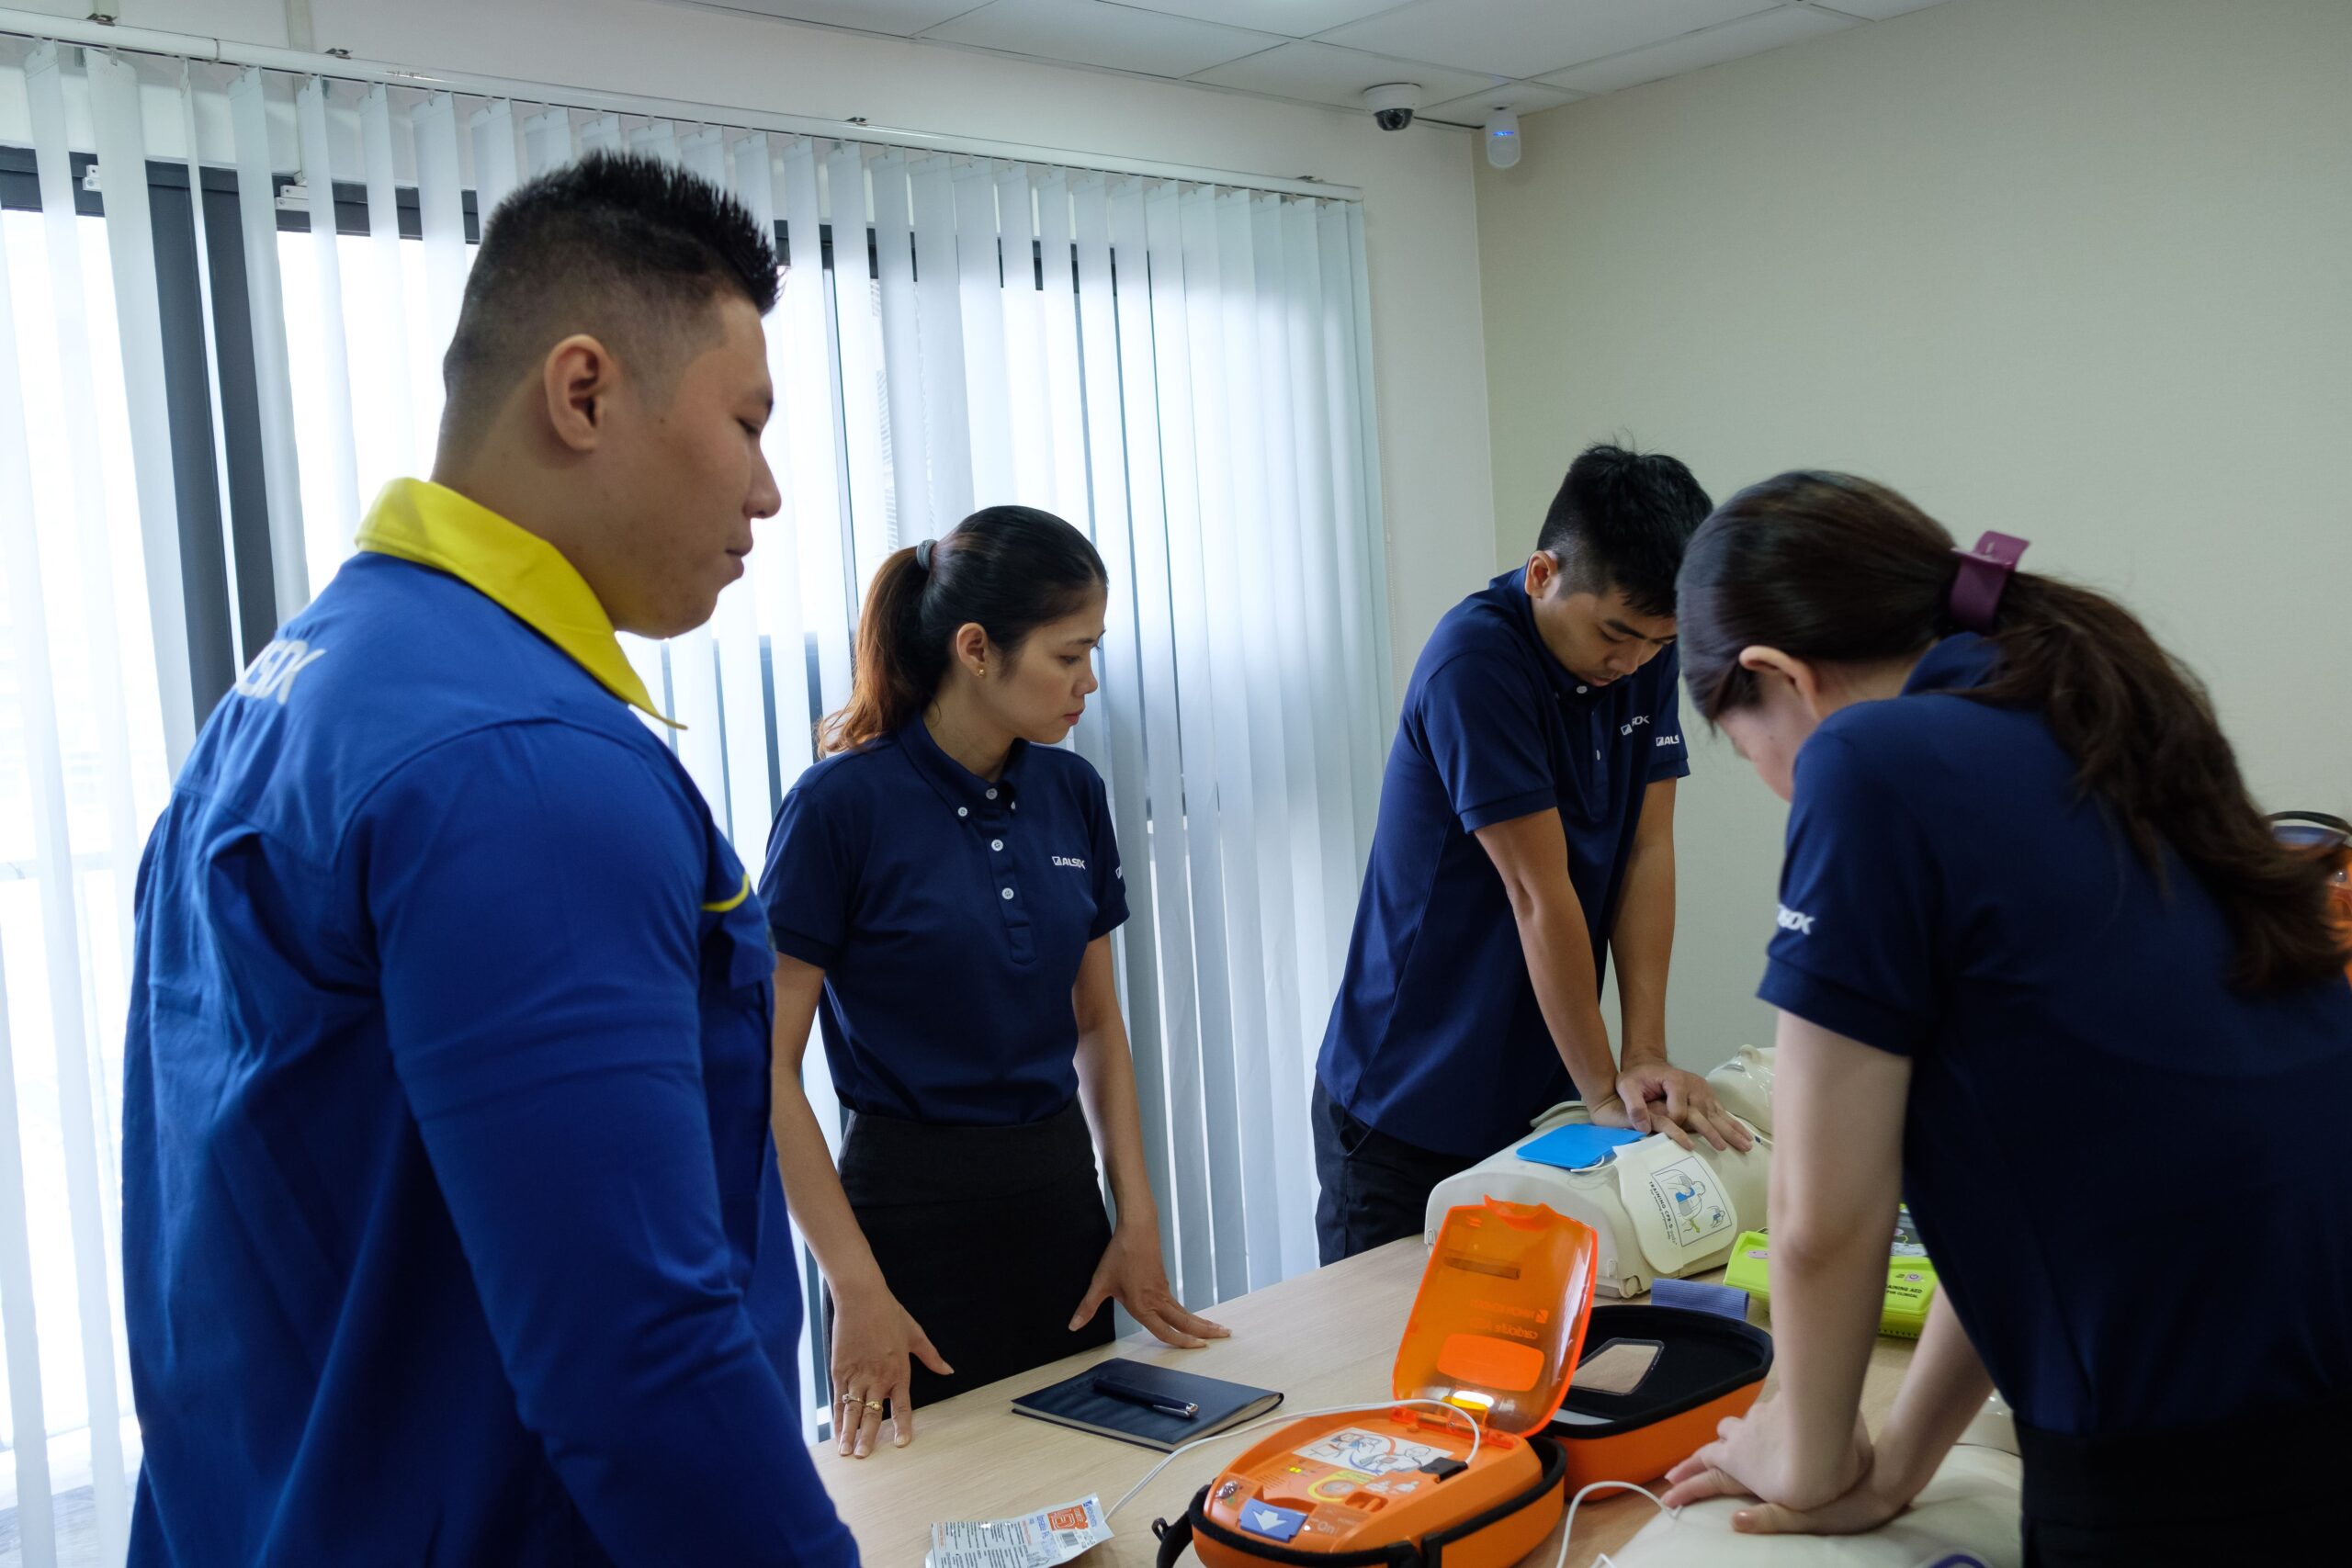 The AED (Automated External Defibrillator) course Flow! Required time and content Explanation.